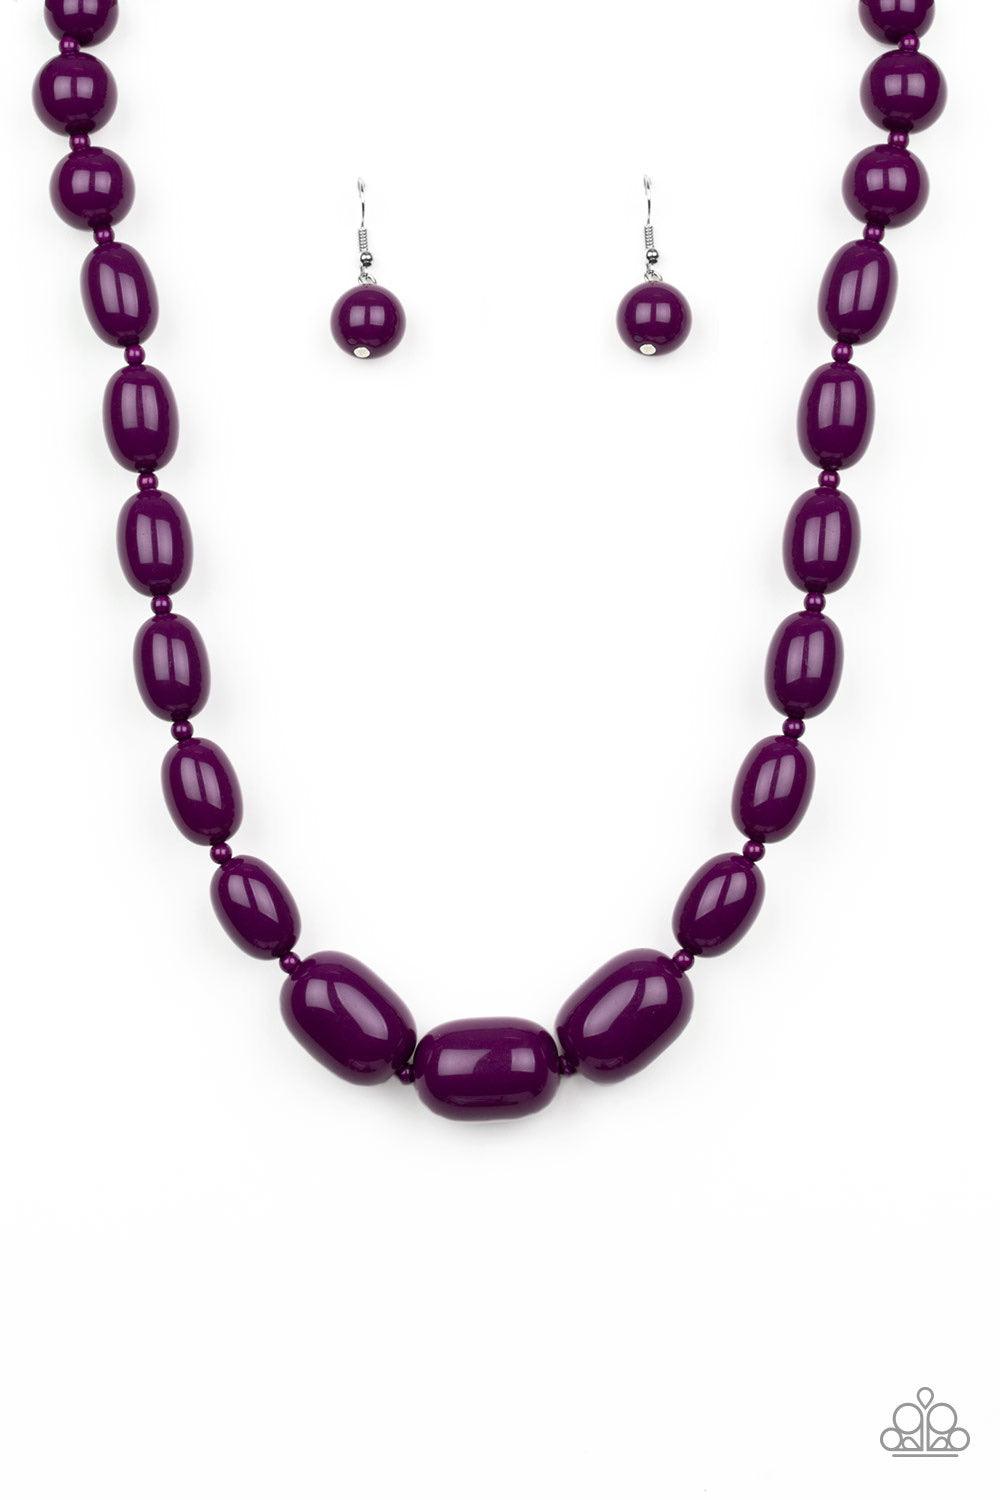 Paparazzi Accessories Poppin Popularity - Purple Infused with dainty purple beads, round plum beads trickle into bold oval beads, creating a bold pop of color below the collar. Features an adjustable clasp closure. Jewelry